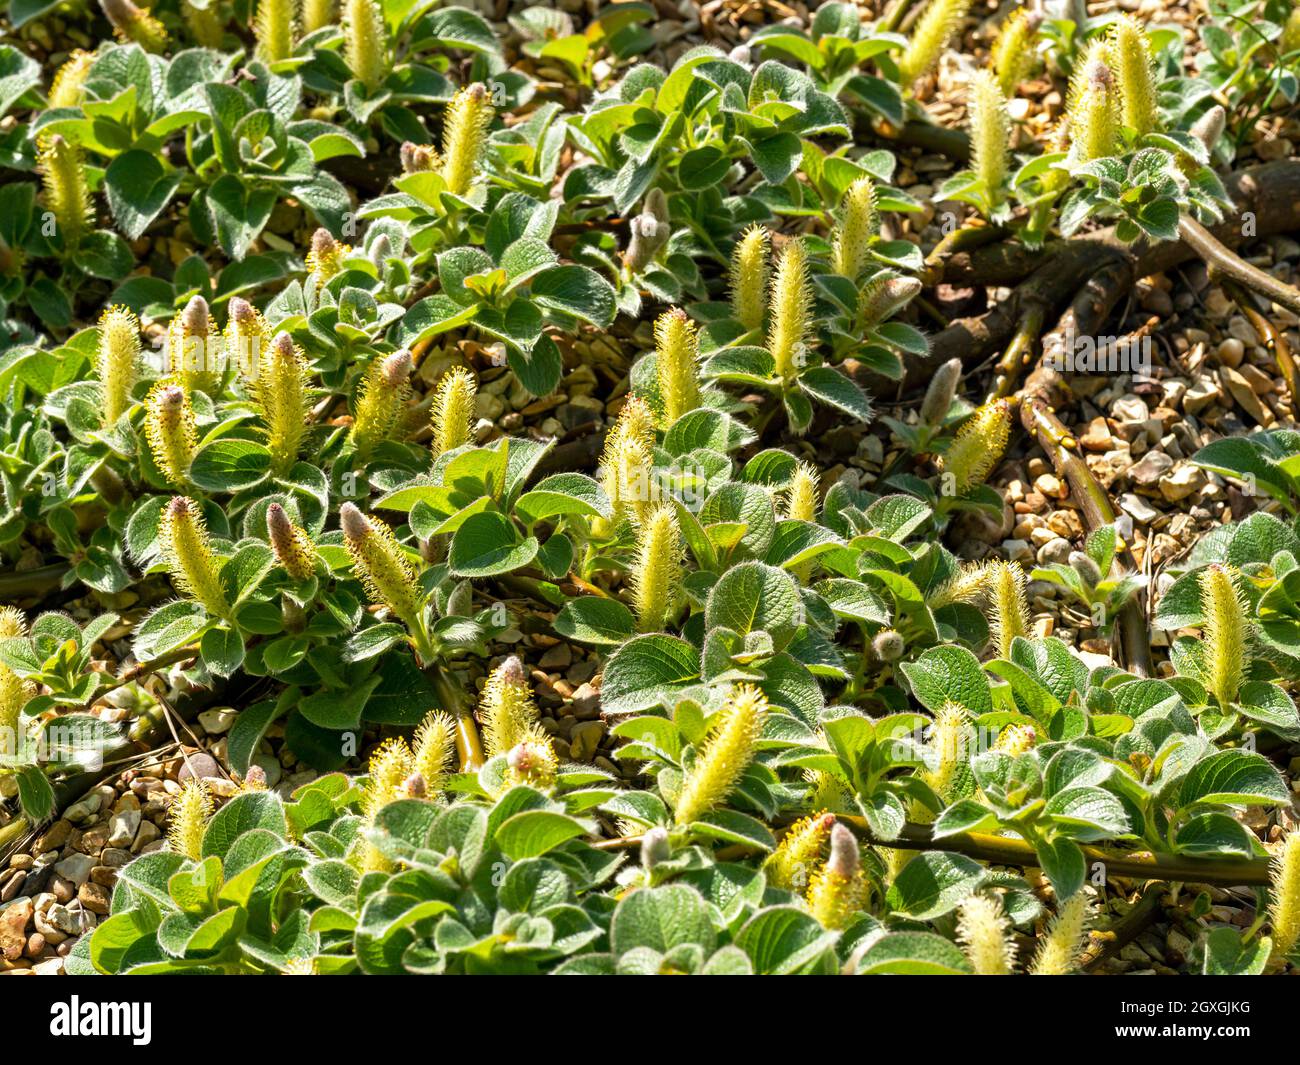 Branches of netleaf willow, Salix reticulata, spreading on the ground with yellow flowers and green leaves Stock Photo